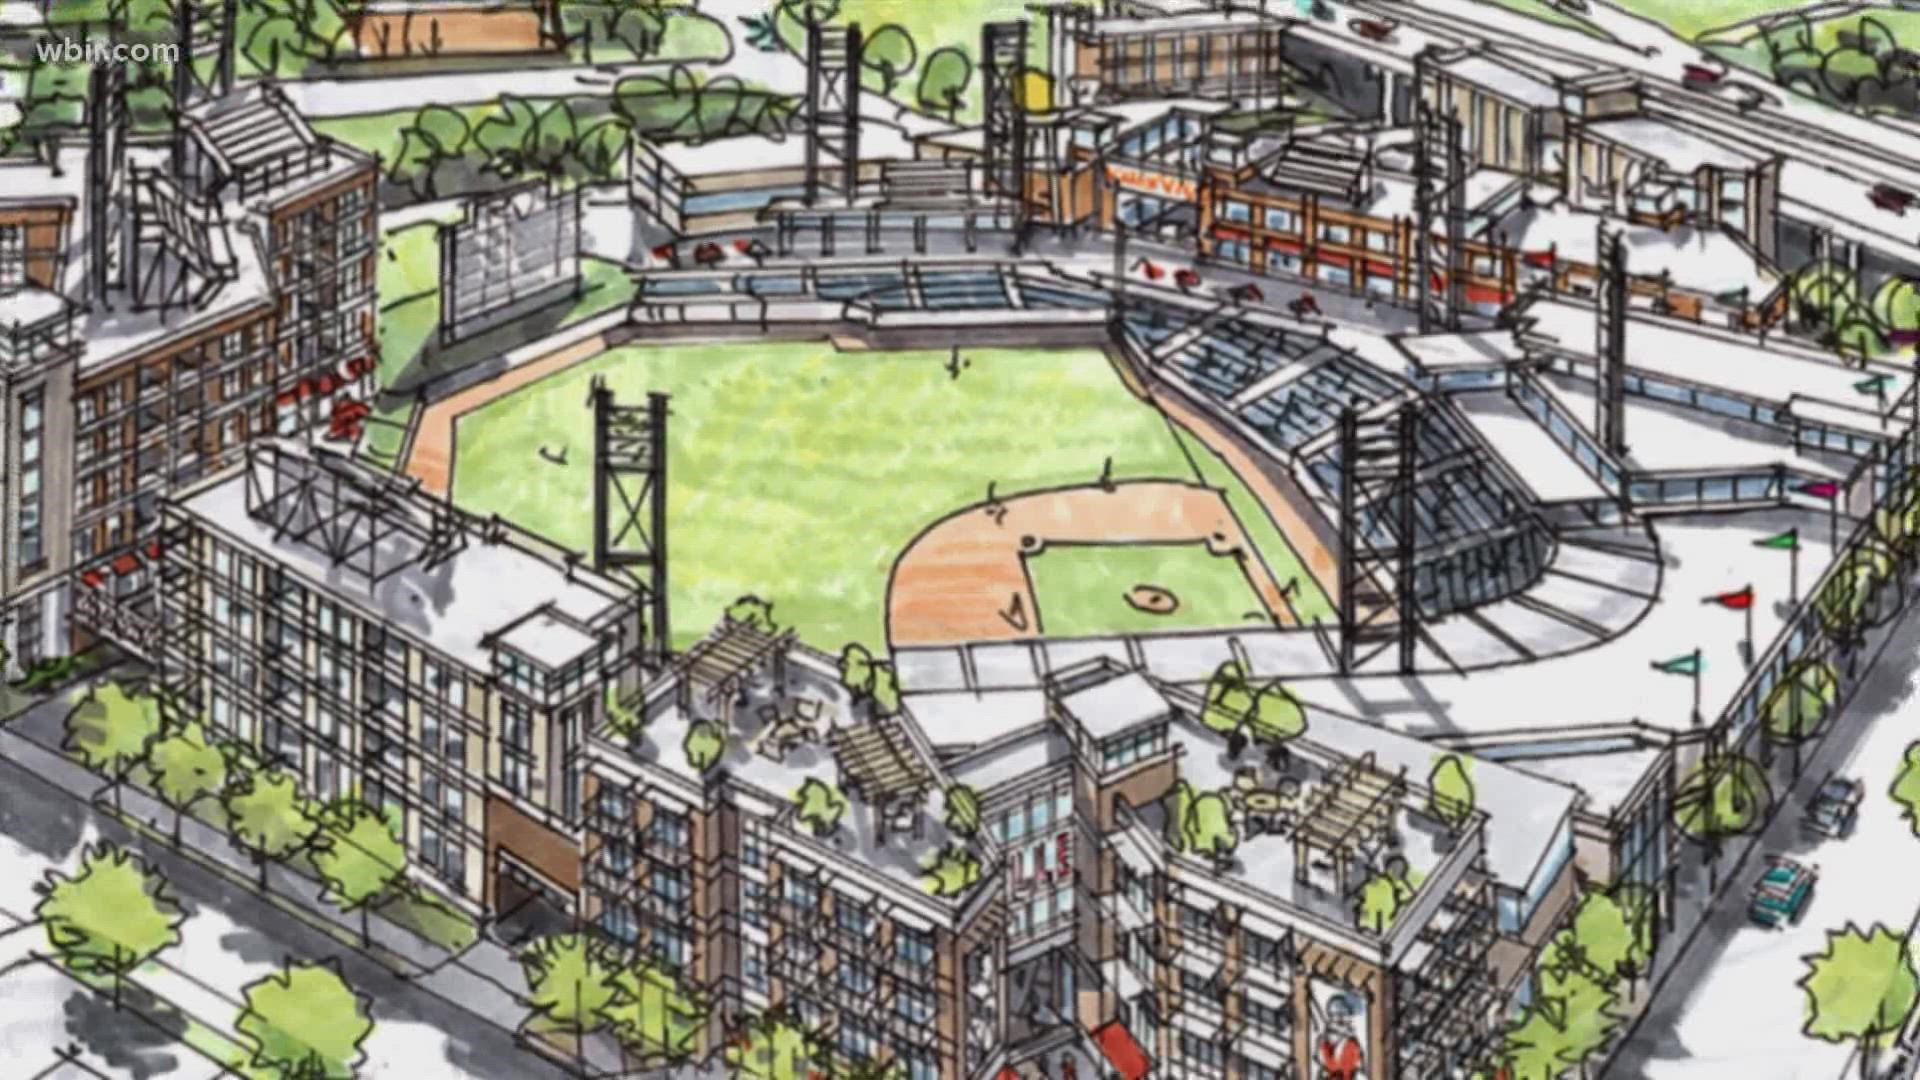 City and county leaders must still approve the deal to build a new baseball stadium in downtown Knoxville.